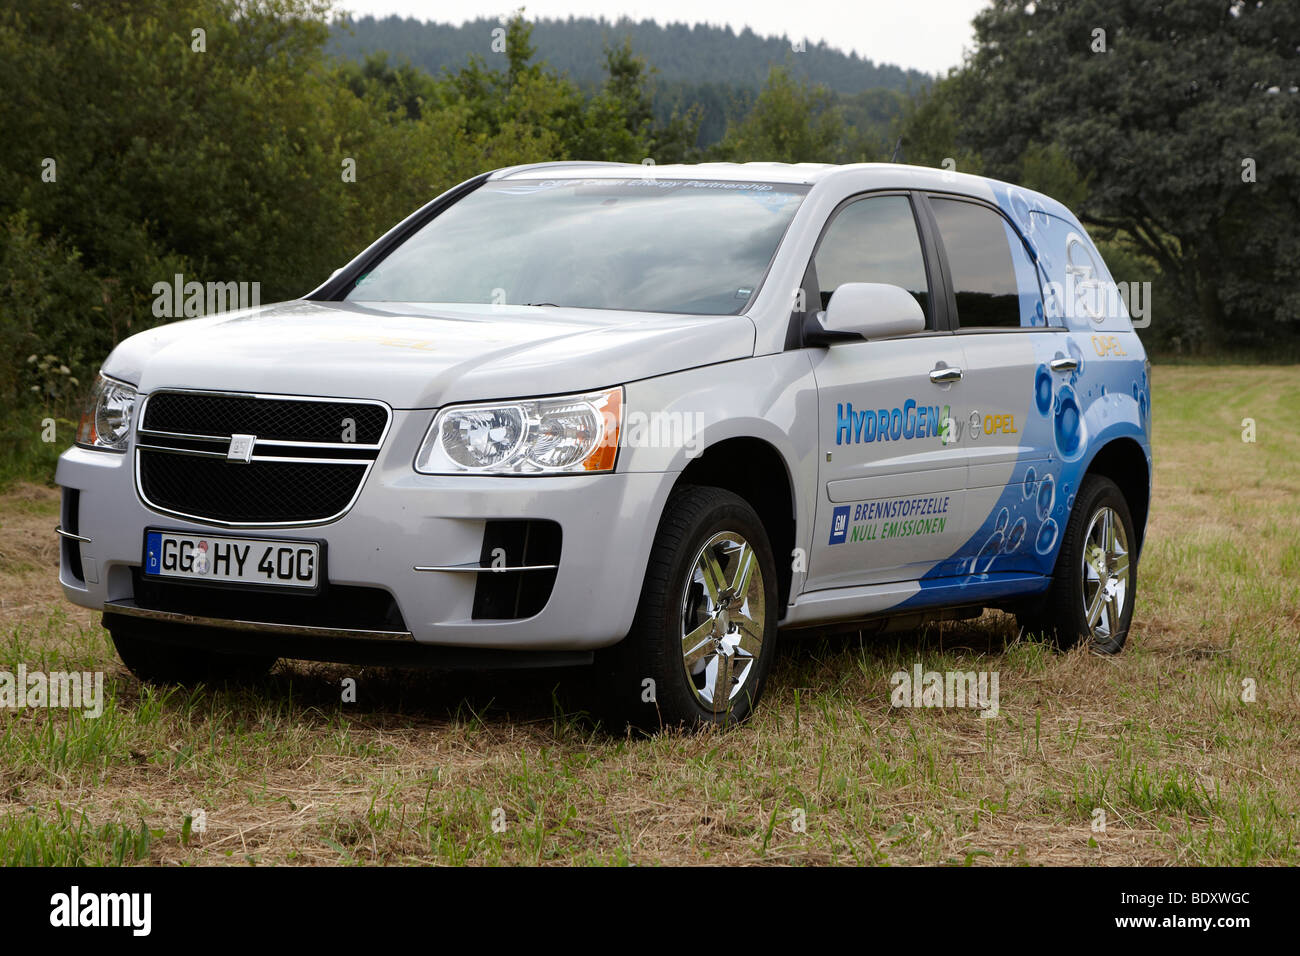 Opel fuel cell test vehicle HydroGen4 near the Nuerburgring, Rhineland-Palatinate, Germany, Europe Stock Photo